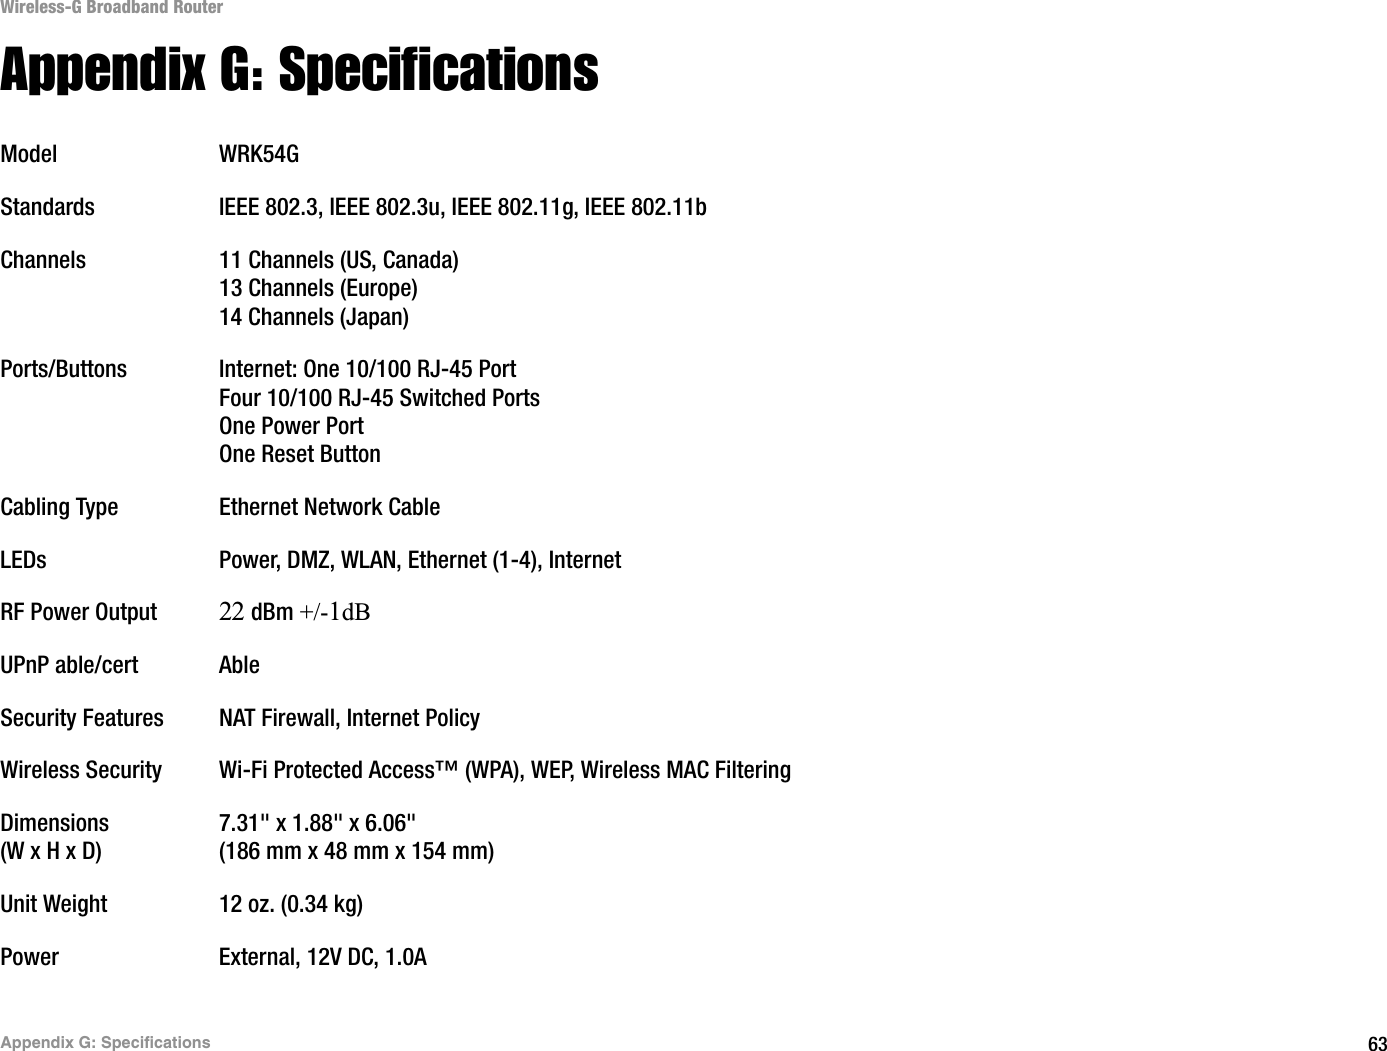 63Appendix G: SpecificationsWireless-G Broadband RouterAppendix G: SpecificationsModel WRK54GStandards IEEE 802.3, IEEE 802.3u, IEEE 802.11g, IEEE 802.11bChannels 11 Channels (US, Canada)13 Channels (Europe)14 Channels (Japan)Ports/Buttons Internet: One 10/100 RJ-45 PortFour 10/100 RJ-45 Switched PortsOne Power PortOne Reset ButtonCabling Type Ethernet Network CableLEDs Power, DMZ, WLAN, Ethernet (1-4), InternetRF Power Output22 dBm +/-1dBUPnP able/cert AbleSecurity Features NAT Firewall, Internet PolicyWireless Security Wi-Fi Protected Access™ (WPA), WEP, Wireless MAC FilteringDimensions 7.31&quot; x 1.88&quot; x 6.06&quot;(W x H x D) (186 mm x 48 mm x 154 mm)Unit Weight 12 oz. (0.34 kg)Power External, 12V DC, 1.0A